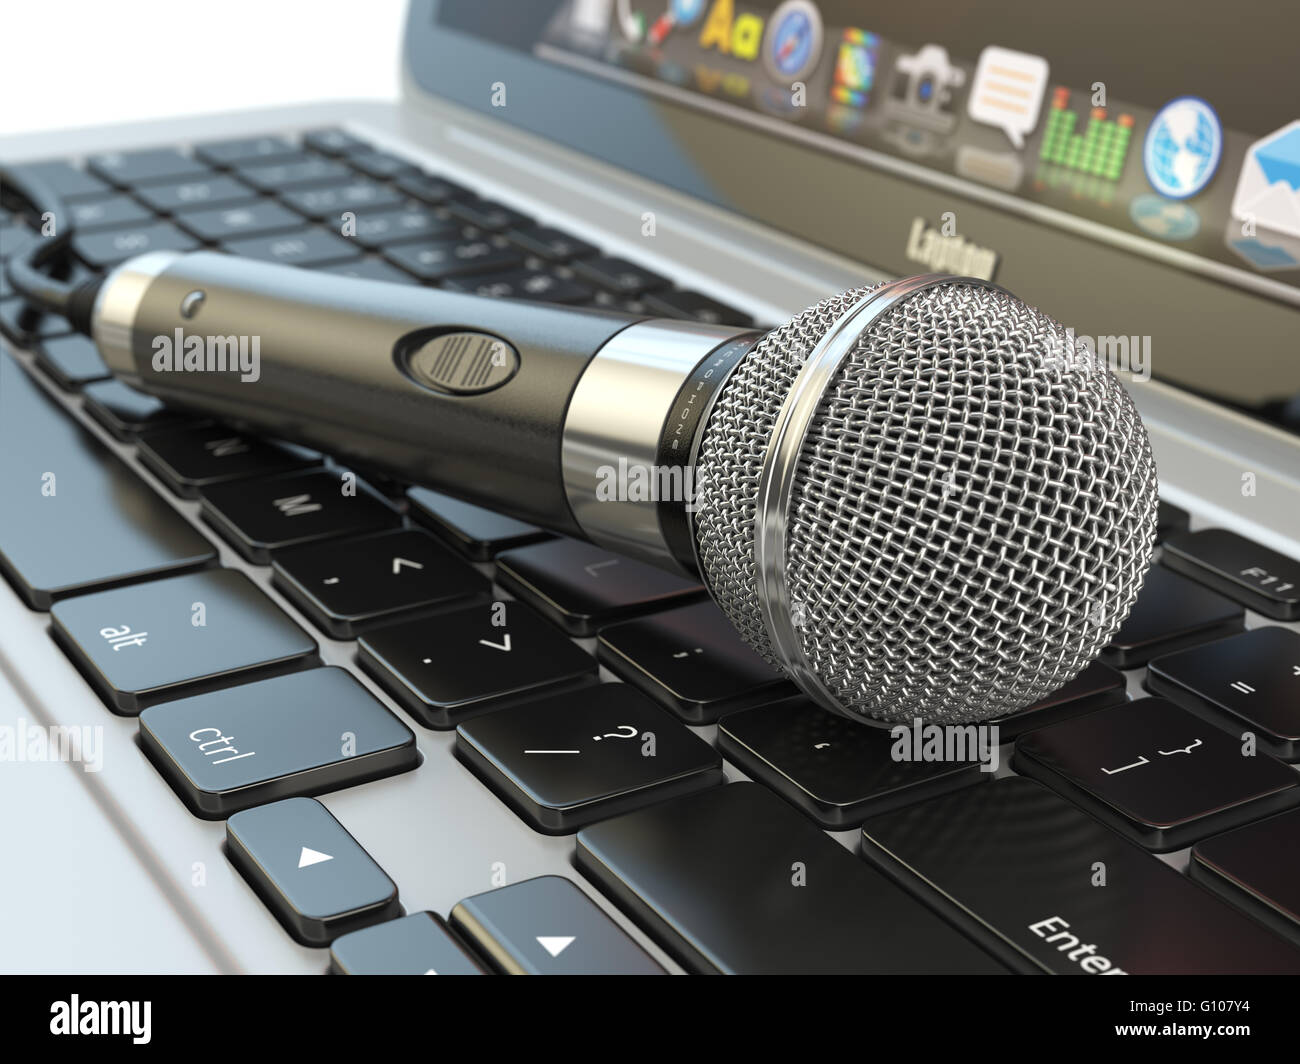 Microphone on the laptop keyboard. Digital audio  music software or karaoke concept. 3d illustration Stock Photo